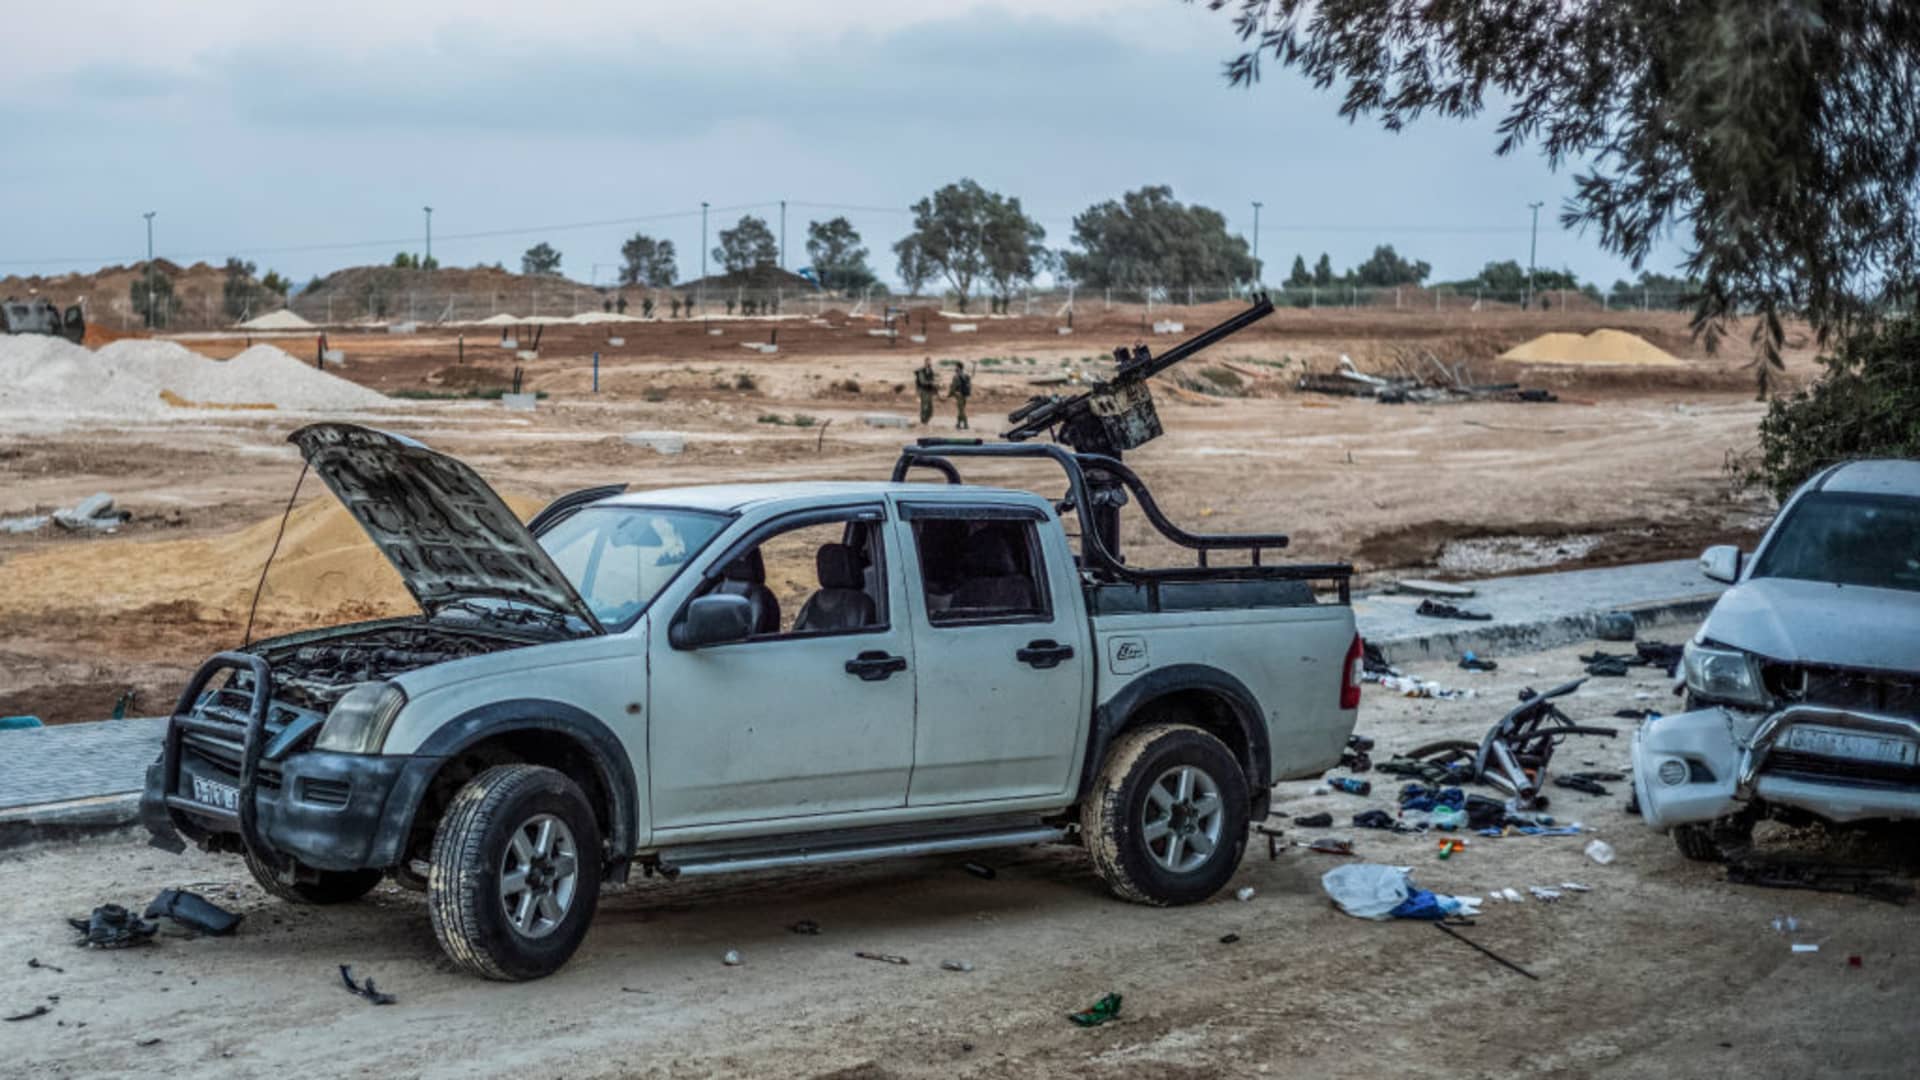 A destroyed pickup truck mounted with machine guns, used by Hamas militants in their attack on Kibbutz Be'eri, lies in the rubble after the Israeli army regained control.